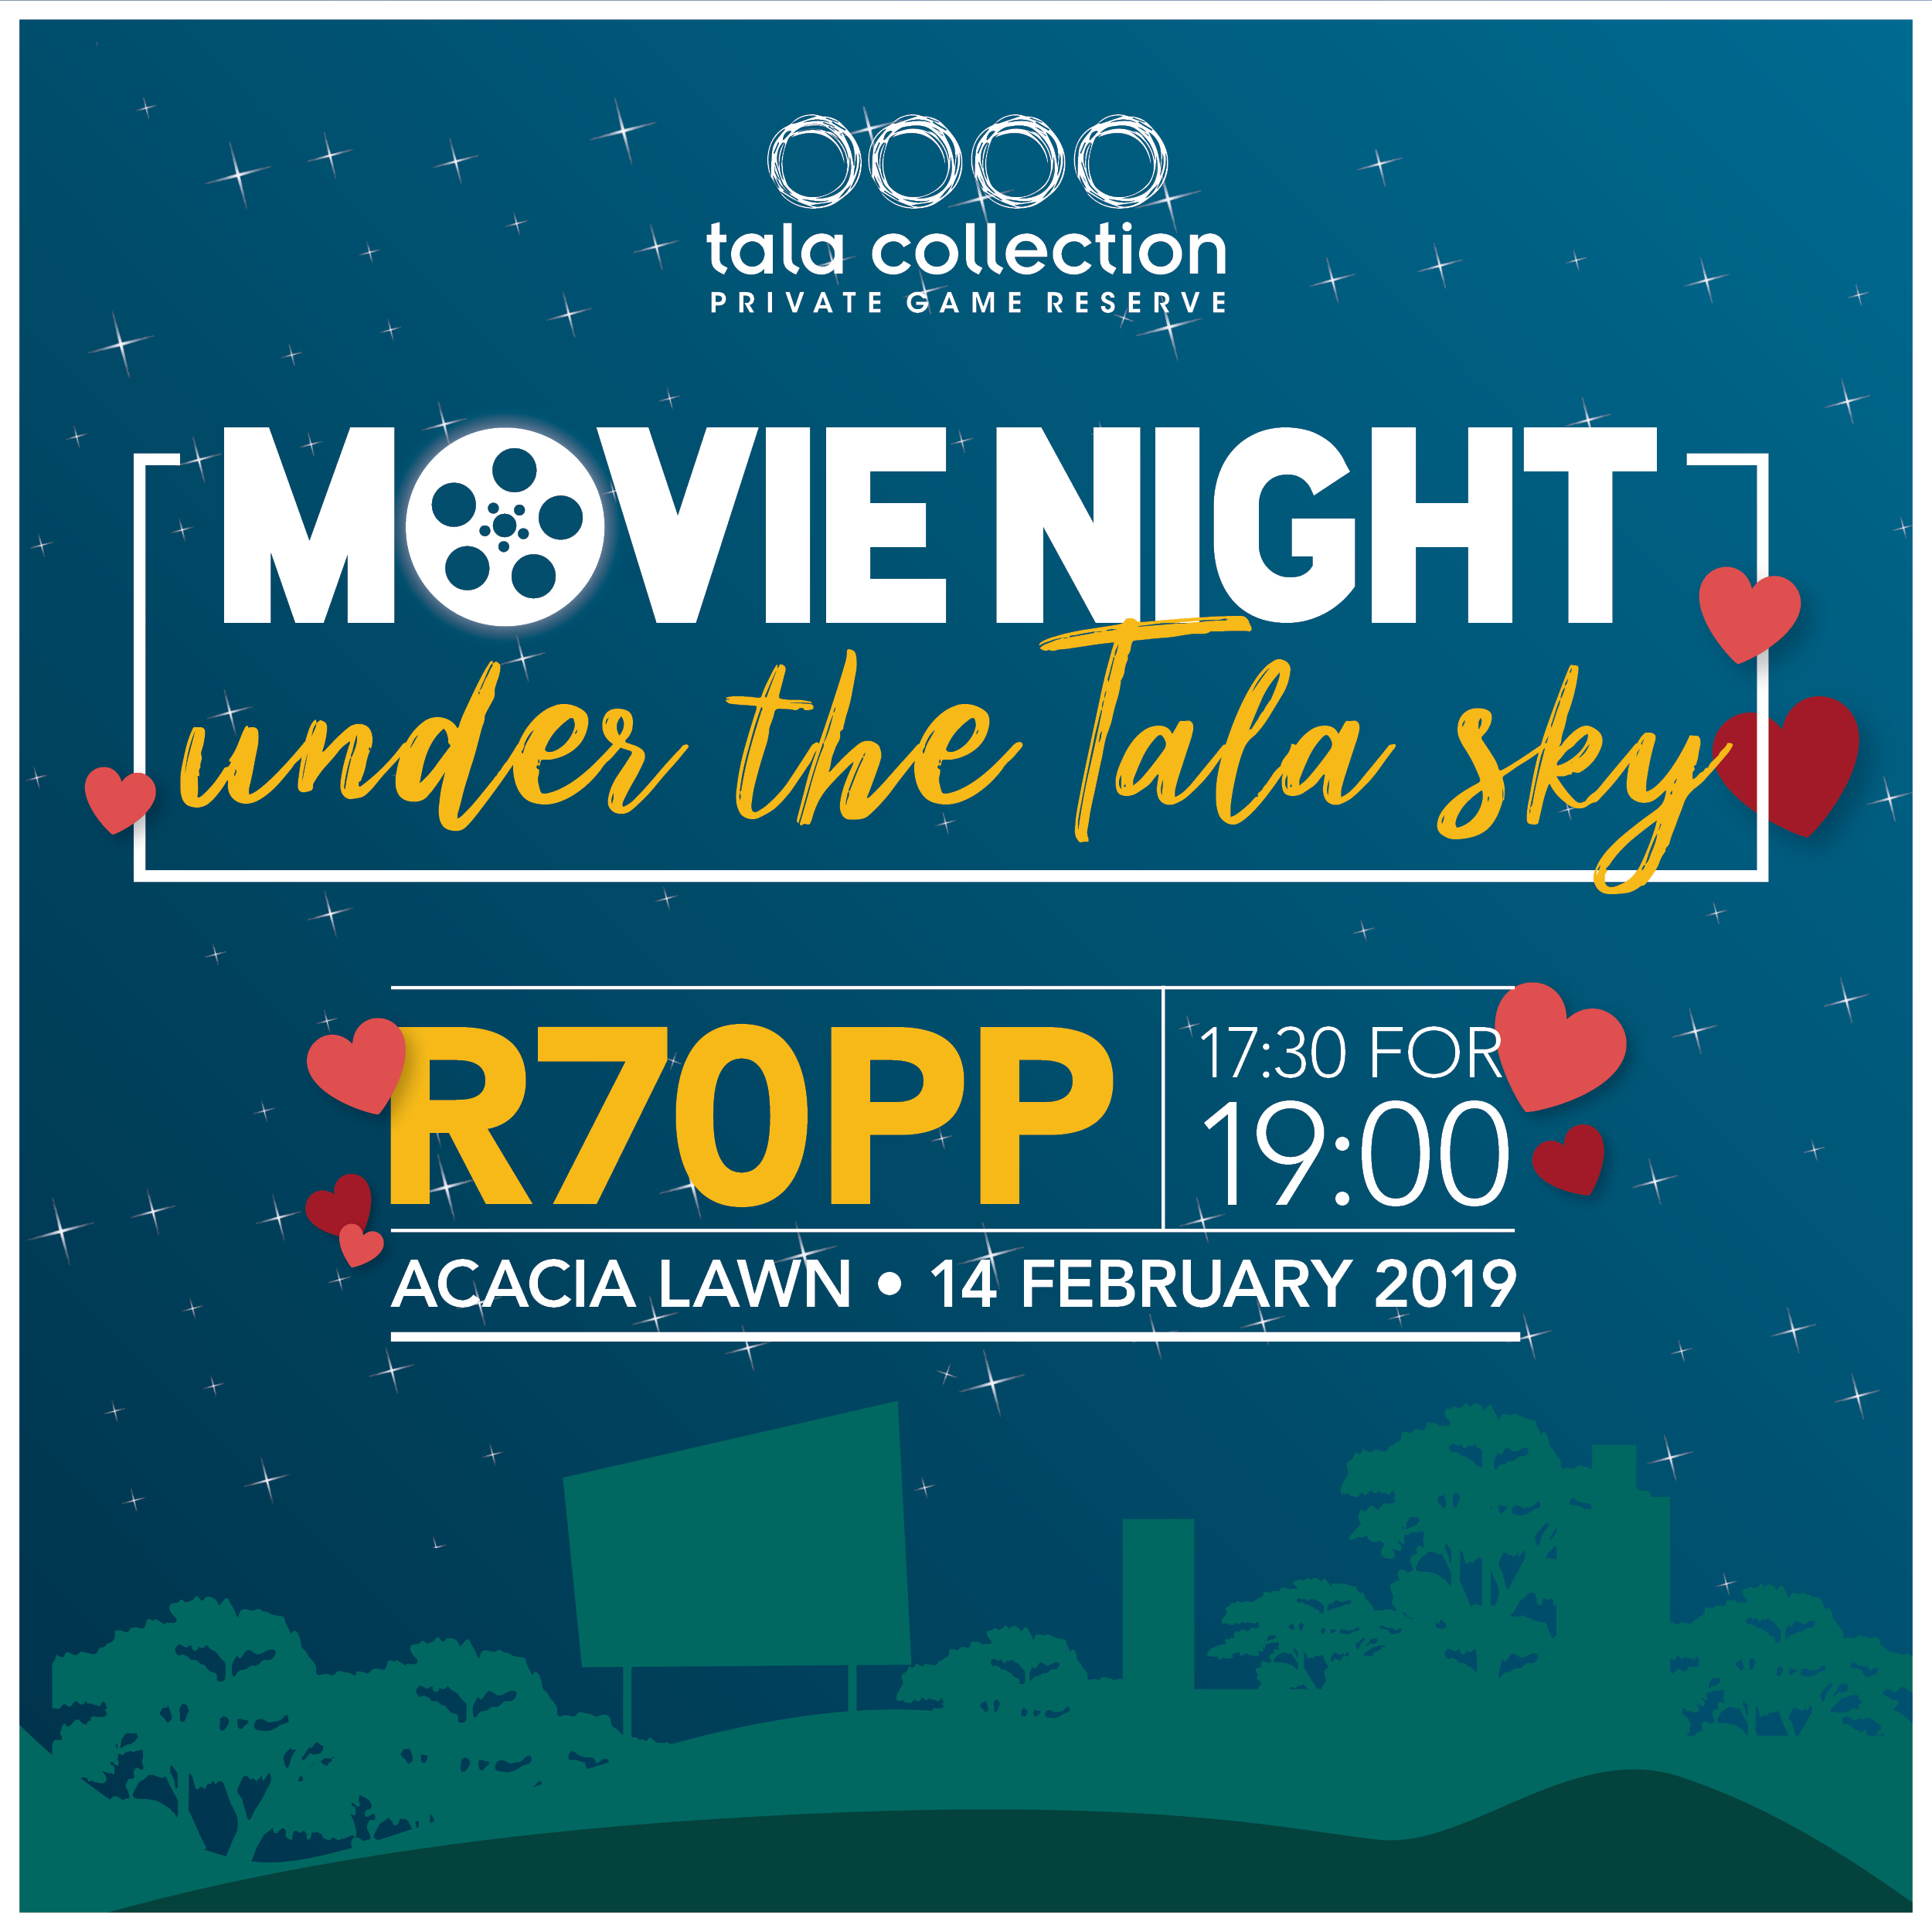 Tala Collection Game Reserve movie night under the Tala sky